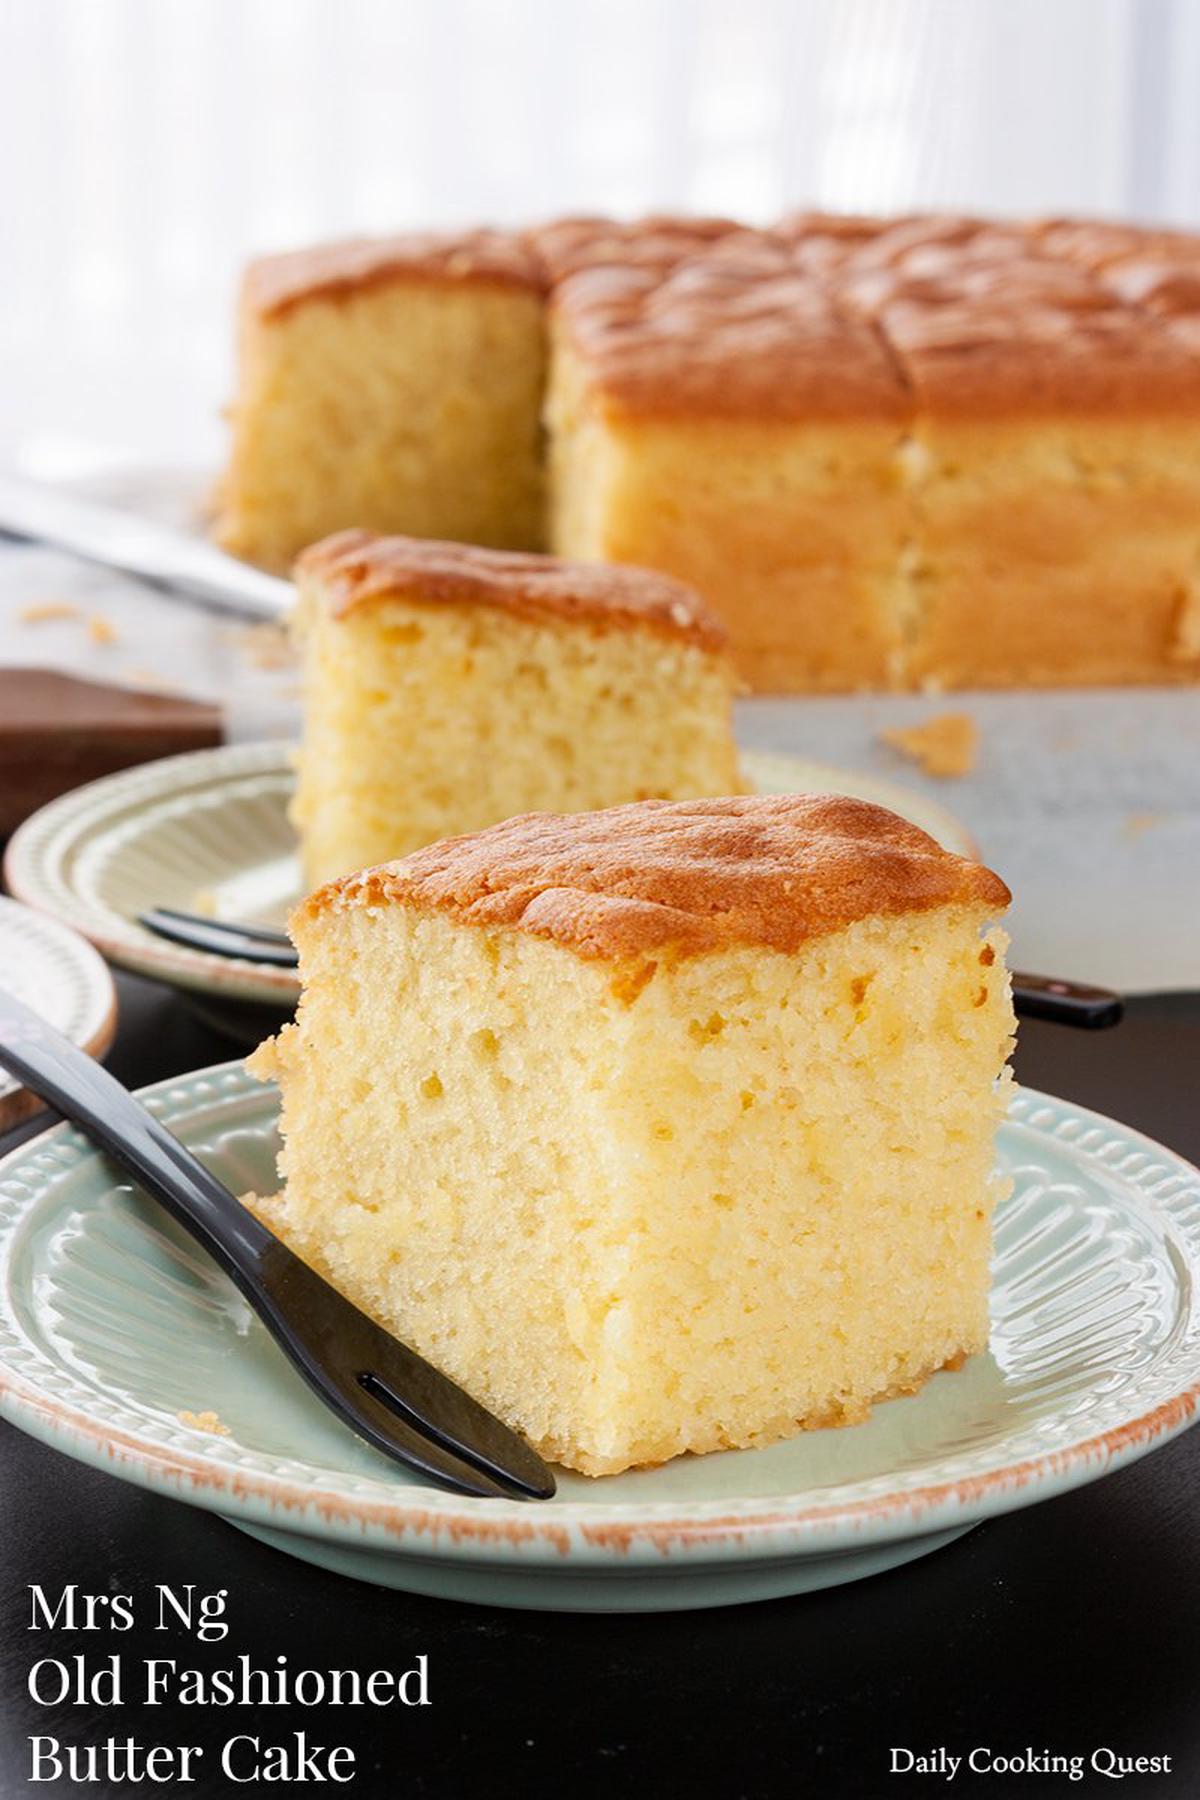 Bakels Malaysia - Longing to have a slice of butter cake with your favorite  cup of beverage to start off the week? Now you can make it yourself using  Pettina Butter Cake